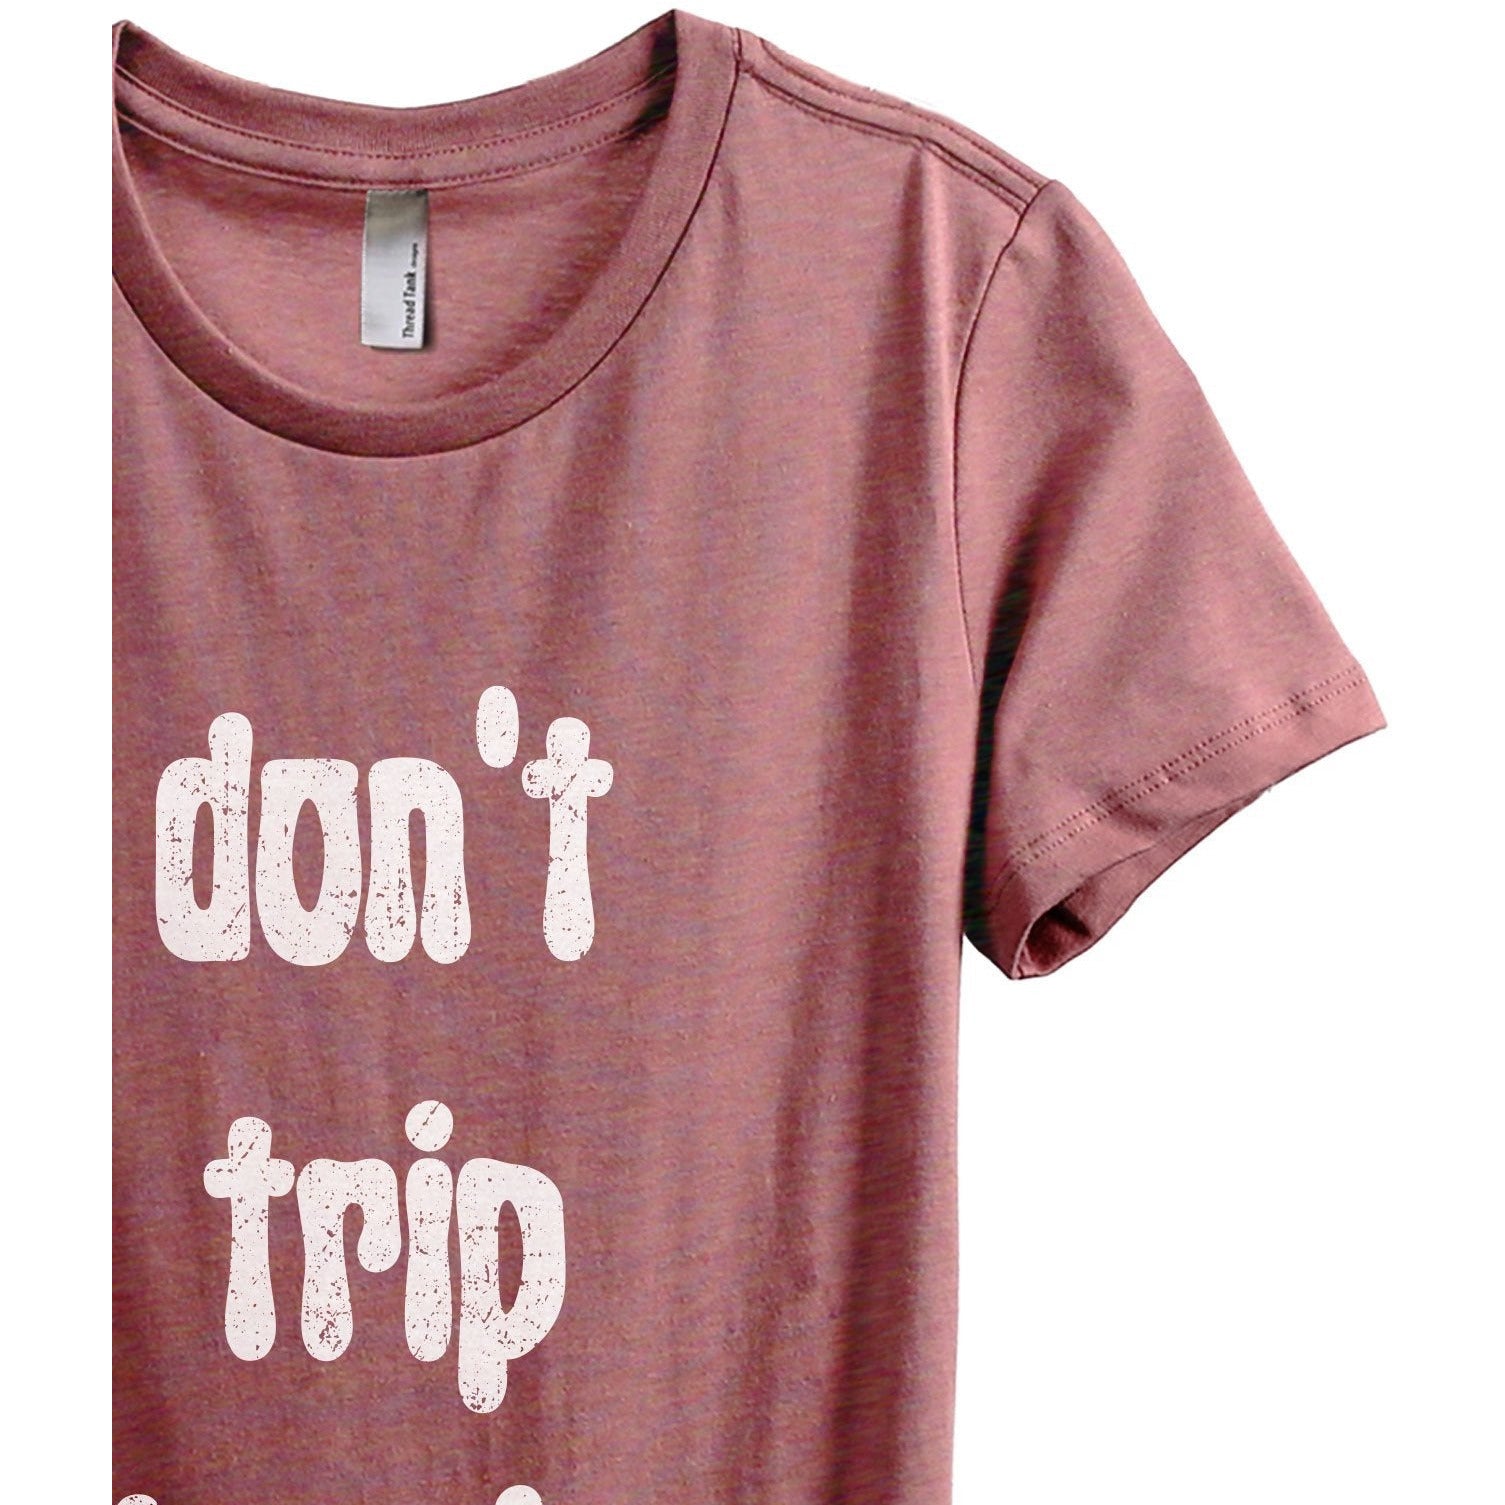 Don't Trip Homie Women's Relaxed Crewneck T-Shirt Top Tee Heather Rouge Zoom Details
